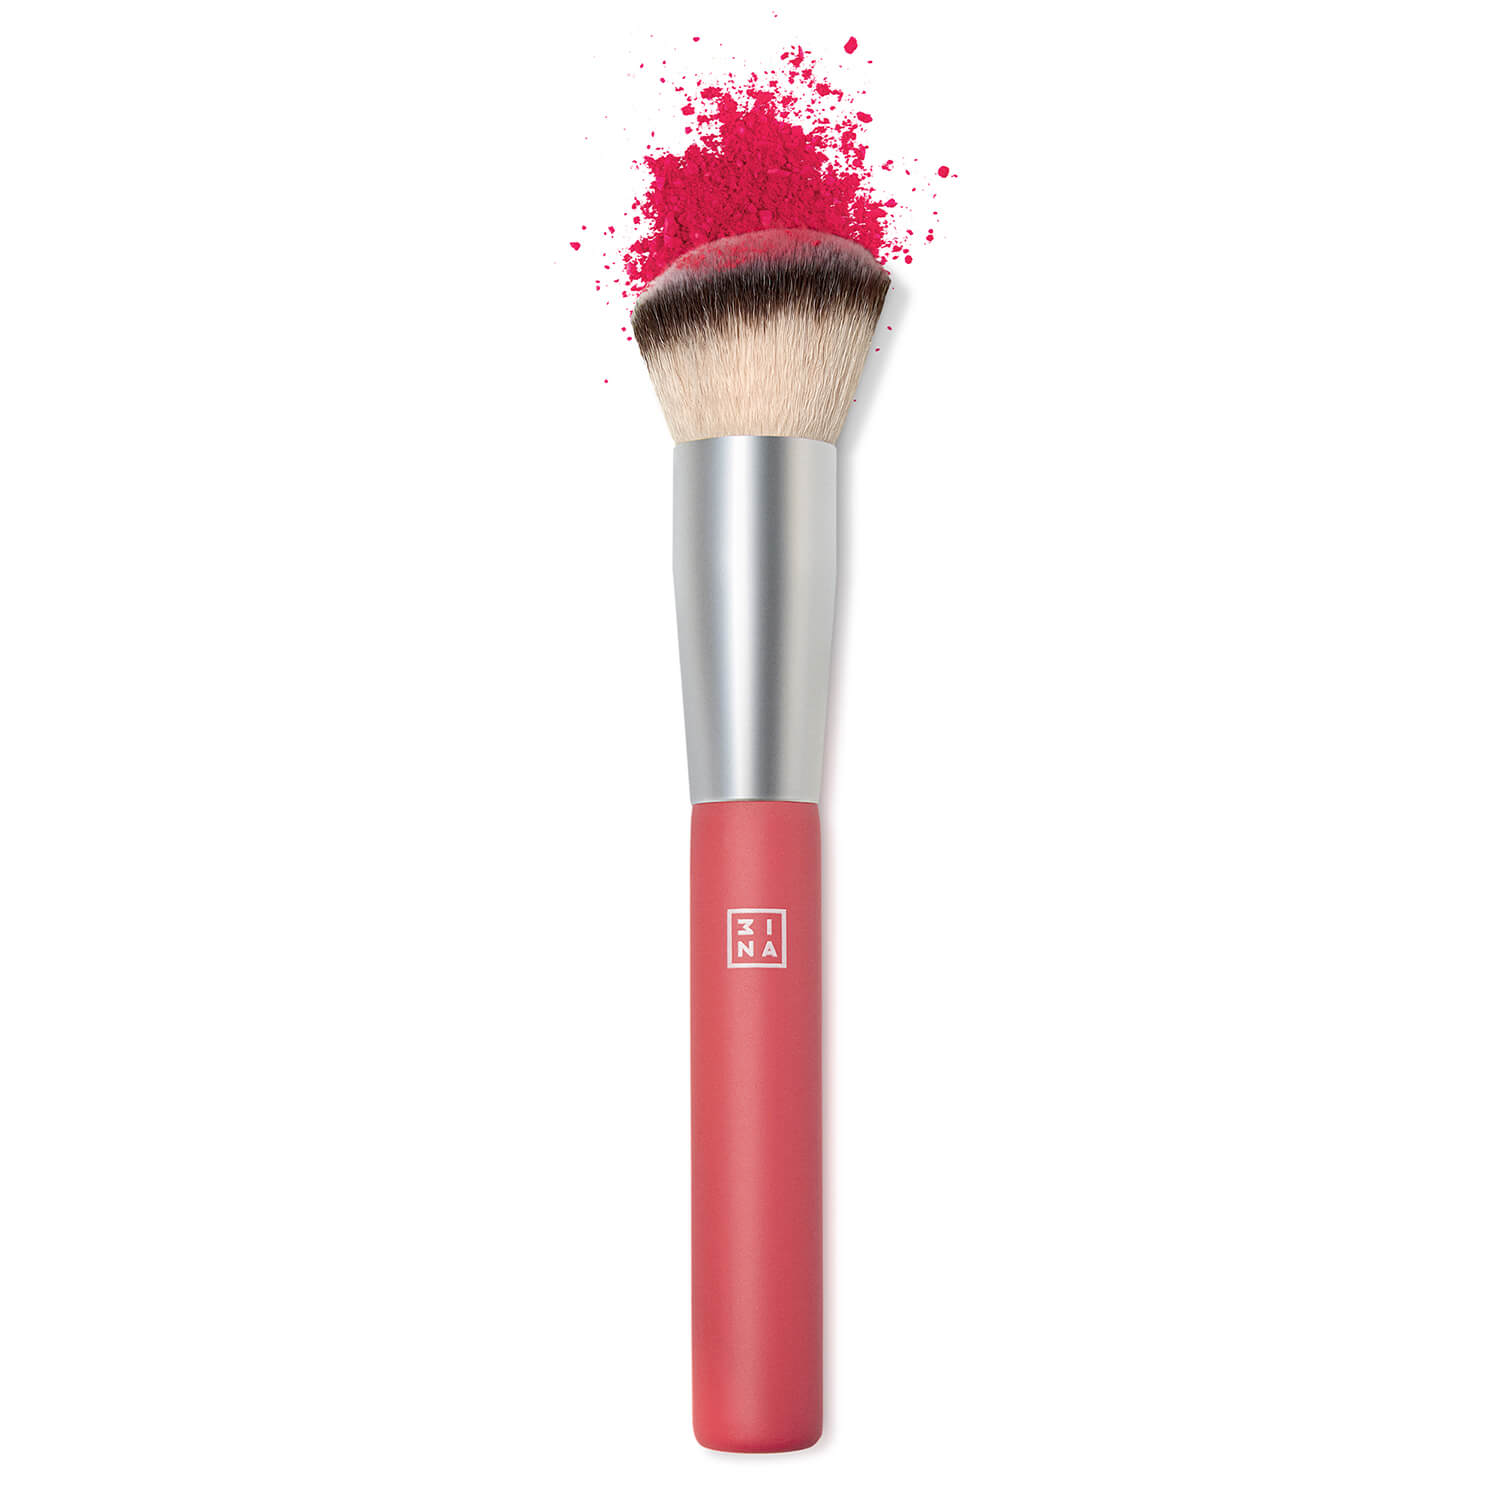 The All In One Brush (Brocha facial)